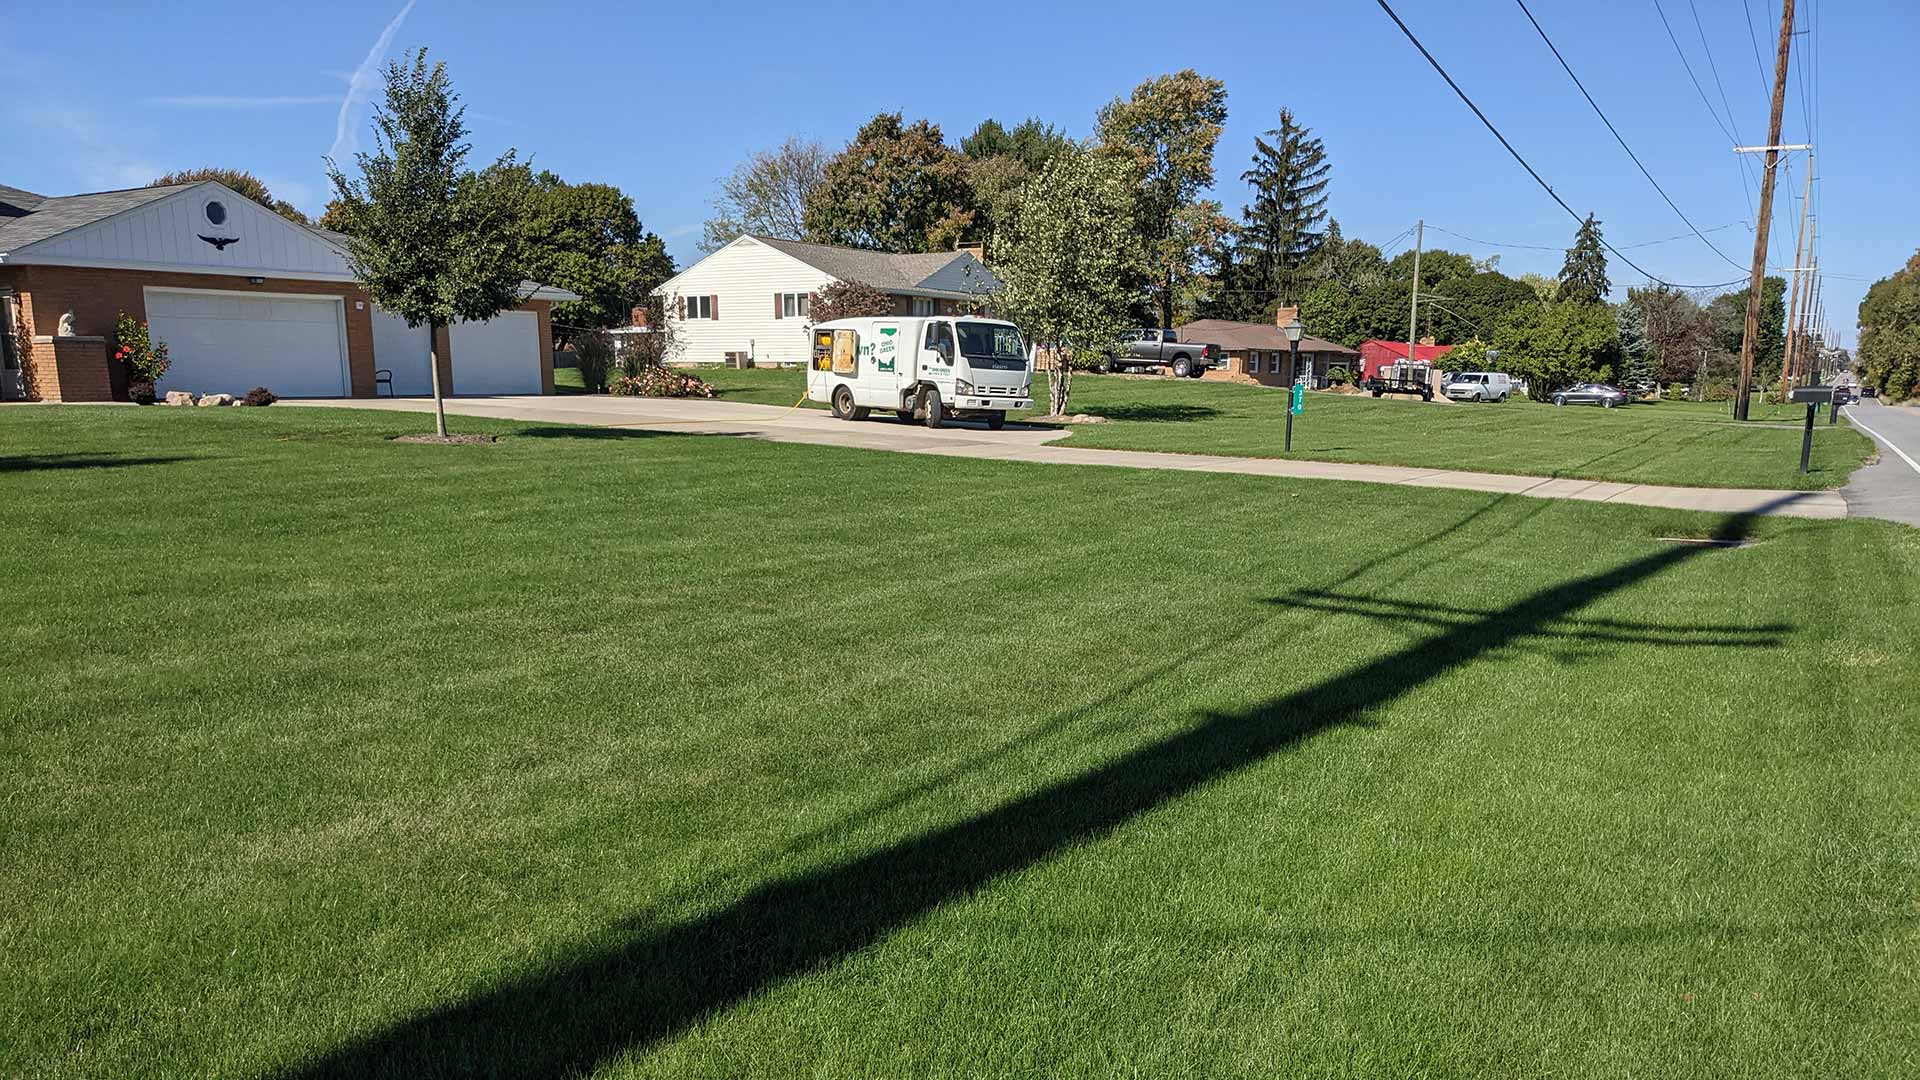 Weed-free lawn with thick grass and service truck nearby in Galion, OH.